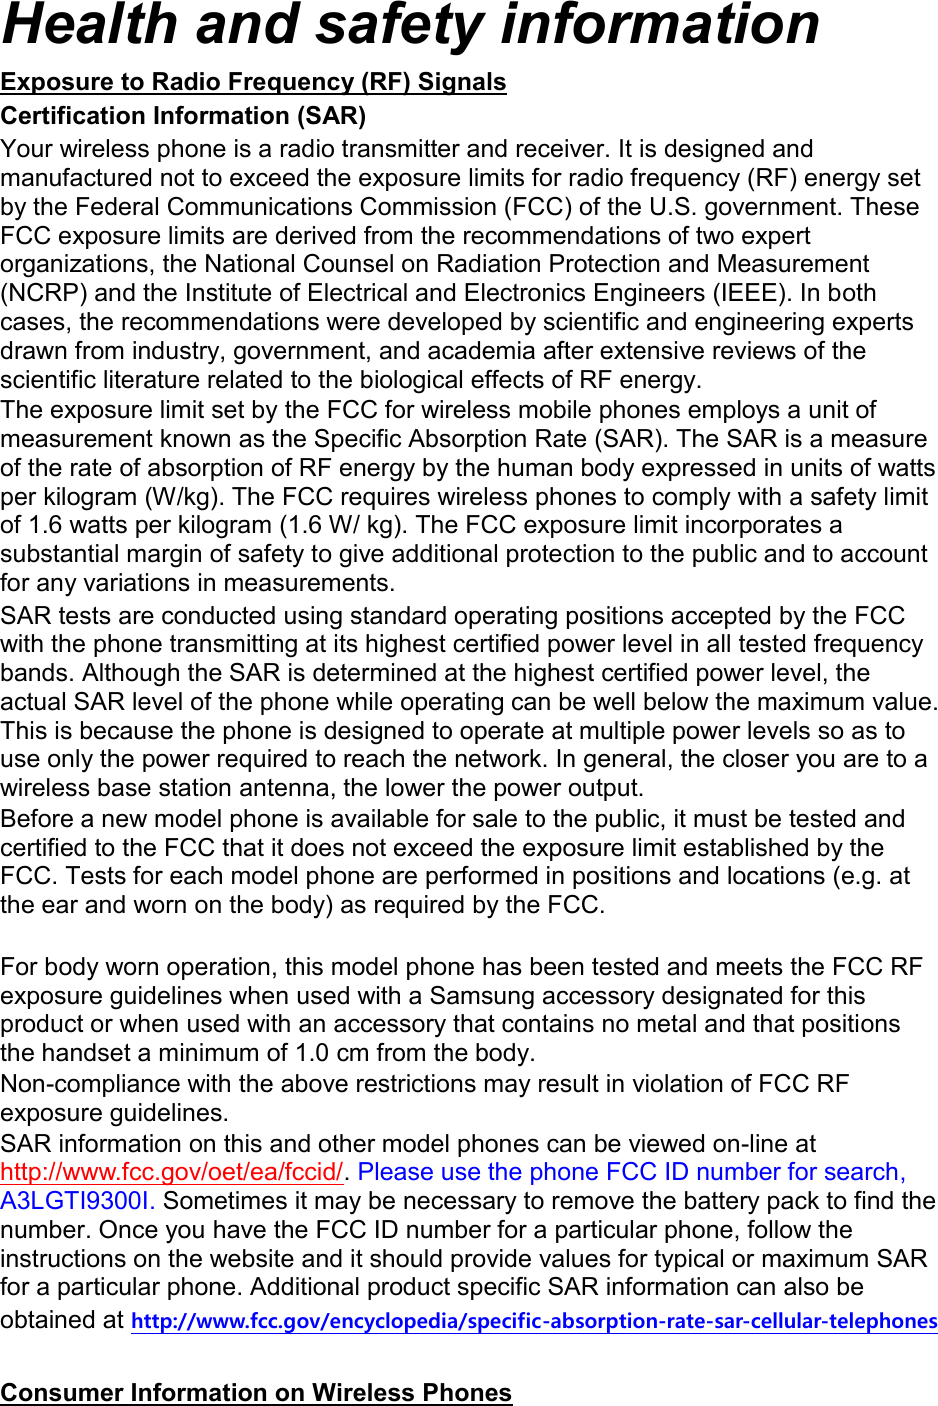 Health and safety information Exposure to Radio Frequency (RF) Signals Certification Information (SAR) Your wireless phone is a radio transmitter and receiver. It is designed and manufactured not to exceed the exposure limits for radio frequency (RF) energy set by the Federal Communications Commission (FCC) of the U.S. government. These FCC exposure limits are derived from the recommendations of two expert organizations, the National Counsel on Radiation Protection and Measurement (NCRP) and the Institute of Electrical and Electronics Engineers (IEEE). In both cases, the recommendations were developed by scientific and engineering experts drawn from industry, government, and academia after extensive reviews of the scientific literature related to the biological effects of RF energy. The exposure limit set by the FCC for wireless mobile phones employs a unit of measurement known as the Specific Absorption Rate (SAR). The SAR is a measure of the rate of absorption of RF energy by the human body expressed in units of watts per kilogram (W/kg). The FCC requires wireless phones to comply with a safety limit of 1.6 watts per kilogram (1.6 W/ kg). The FCC exposure limit incorporates a substantial margin of safety to give additional protection to the public and to account for any variations in measurements. SAR tests are conducted using standard operating positions accepted by the FCC with the phone transmitting at its highest certified power level in all tested frequency bands. Although the SAR is determined at the highest certified power level, the actual SAR level of the phone while operating can be well below the maximum value. This is because the phone is designed to operate at multiple power levels so as to use only the power required to reach the network. In general, the closer you are to a wireless base station antenna, the lower the power output. Before a new model phone is available for sale to the public, it must be tested and certified to the FCC that it does not exceed the exposure limit established by the FCC. Tests for each model phone are performed in positions and locations (e.g. at the ear and worn on the body) as required by the FCC.      For body worn operation, this model phone has been tested and meets the FCC RF exposure guidelines when used with a Samsung accessory designated for this product or when used with an accessory that contains no metal and that positions the handset a minimum of 1.0 cm from the body.   Non-compliance with the above restrictions may result in violation of FCC RF exposure guidelines. SAR information on this and other model phones can be viewed on-line at http://www.fcc.gov/oet/ea/fccid/. Please use the phone FCC ID number for search, A3LGTI9300I. Sometimes it may be necessary to remove the battery pack to find the number. Once you have the FCC ID number for a particular phone, follow the instructions on the website and it should provide values for typical or maximum SAR for a particular phone. Additional product specific SAR information can also be obtained at http://www.fcc.gov/encyclopedia/specific-absorption-rate-sar-cellular-telephones  Consumer Information on Wireless Phones 